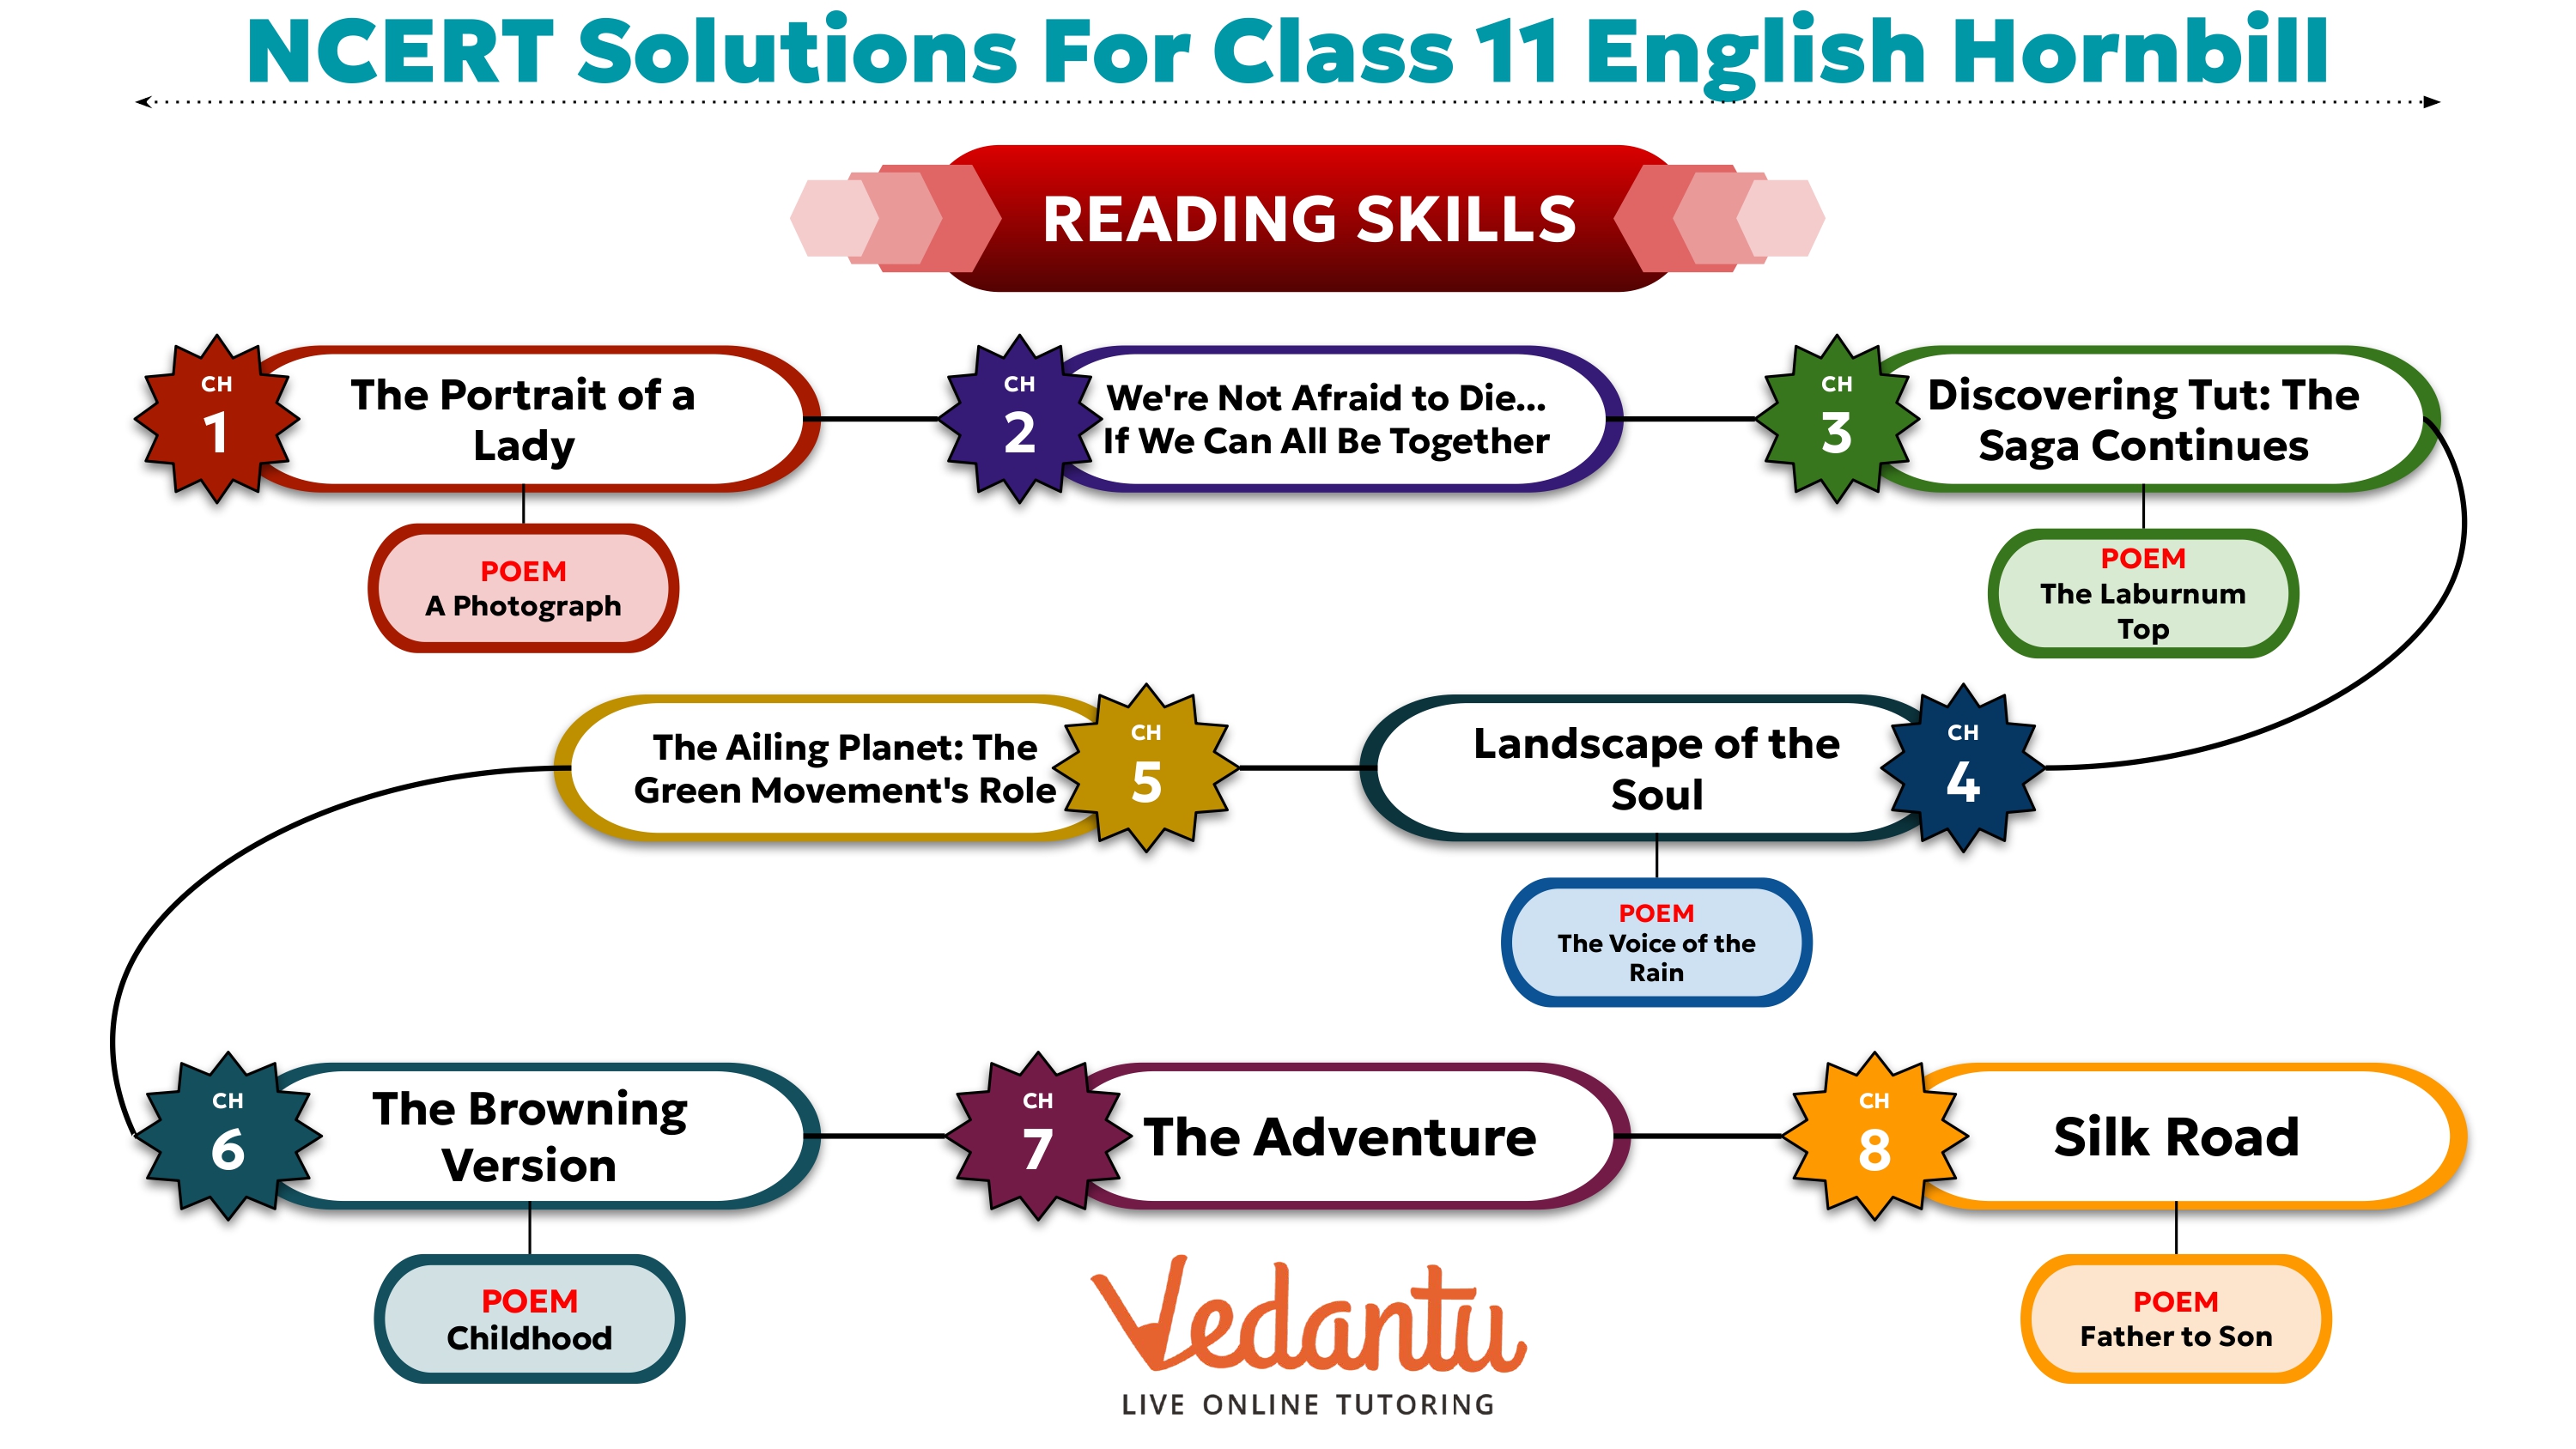 NCERT Solutions for Class 11 English Hornbill Chapter-wise Overview